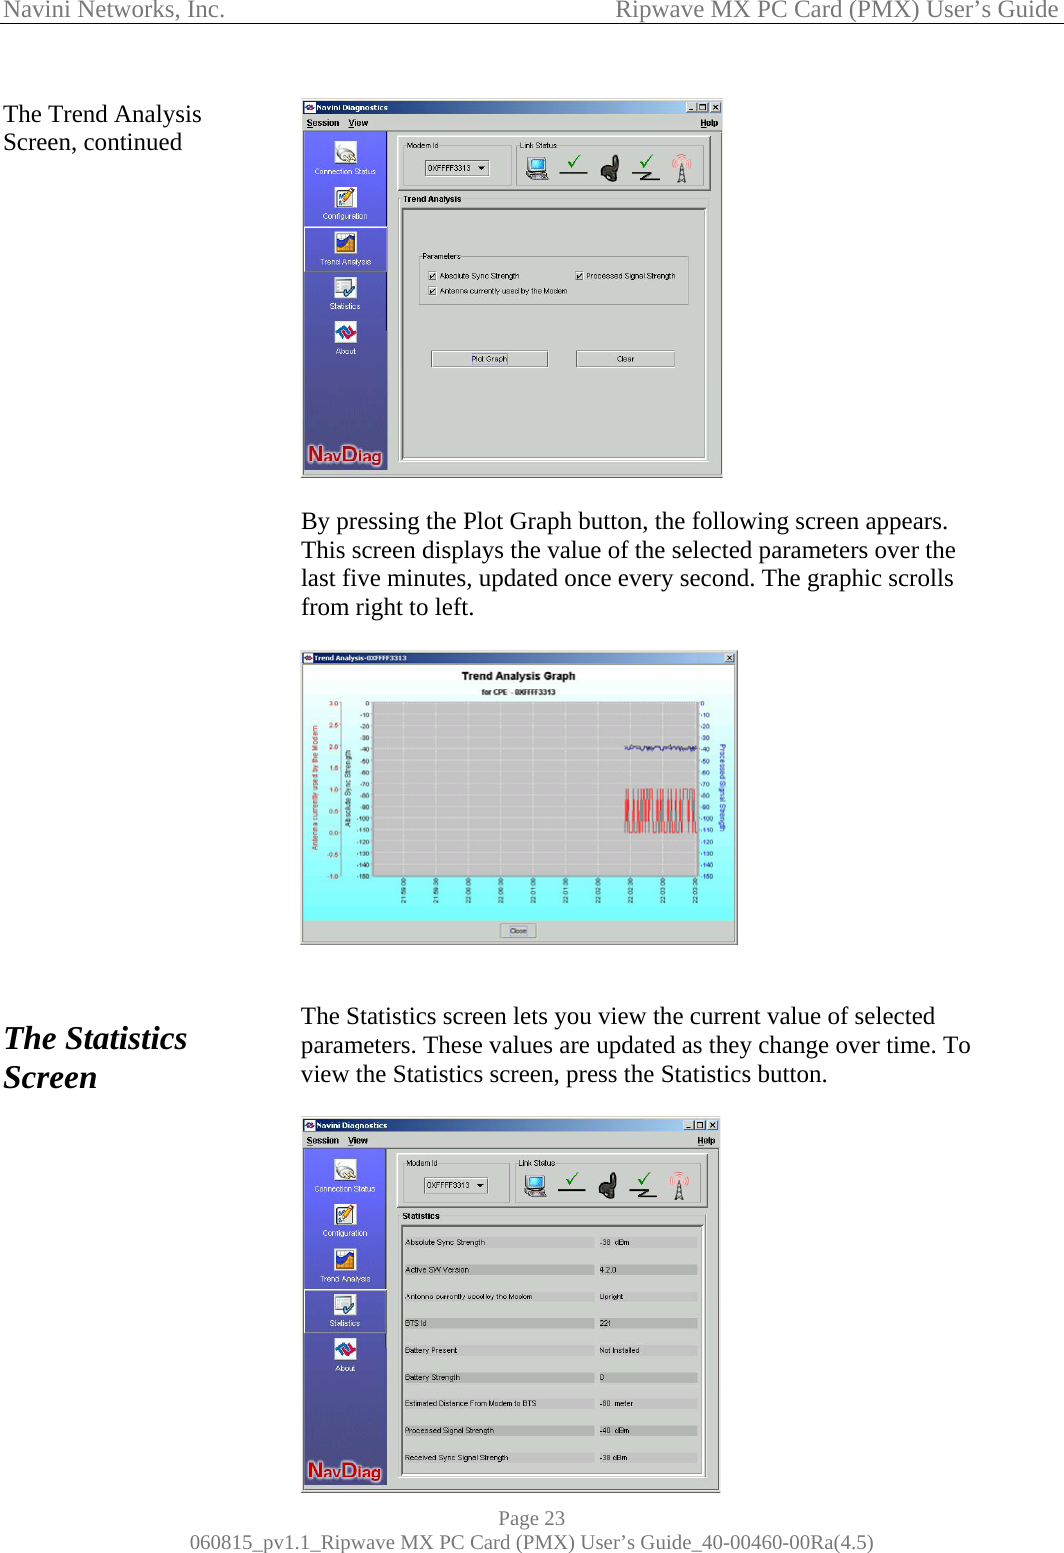 Navini Networks, Inc.                                           Ripwave MX PC Card (PMX) User’s Guide The Trend Analysis Screen, continued                                 The Statistics Screen              By pressing the Plot Graph button, the following screen appears. This screen displays the value of the selected parameters over the last five minutes, updated once every second. The graphic scrolls from right to left.     The Statistics screen lets you view the current value of selected parameters. These values are updated as they change over time. To view the Statistics screen, press the Statistics button.             Page 23 060815_pv1.1_Ripwave MX PC Card (PMX) User’s Guide_40-00460-00Ra(4.5) 